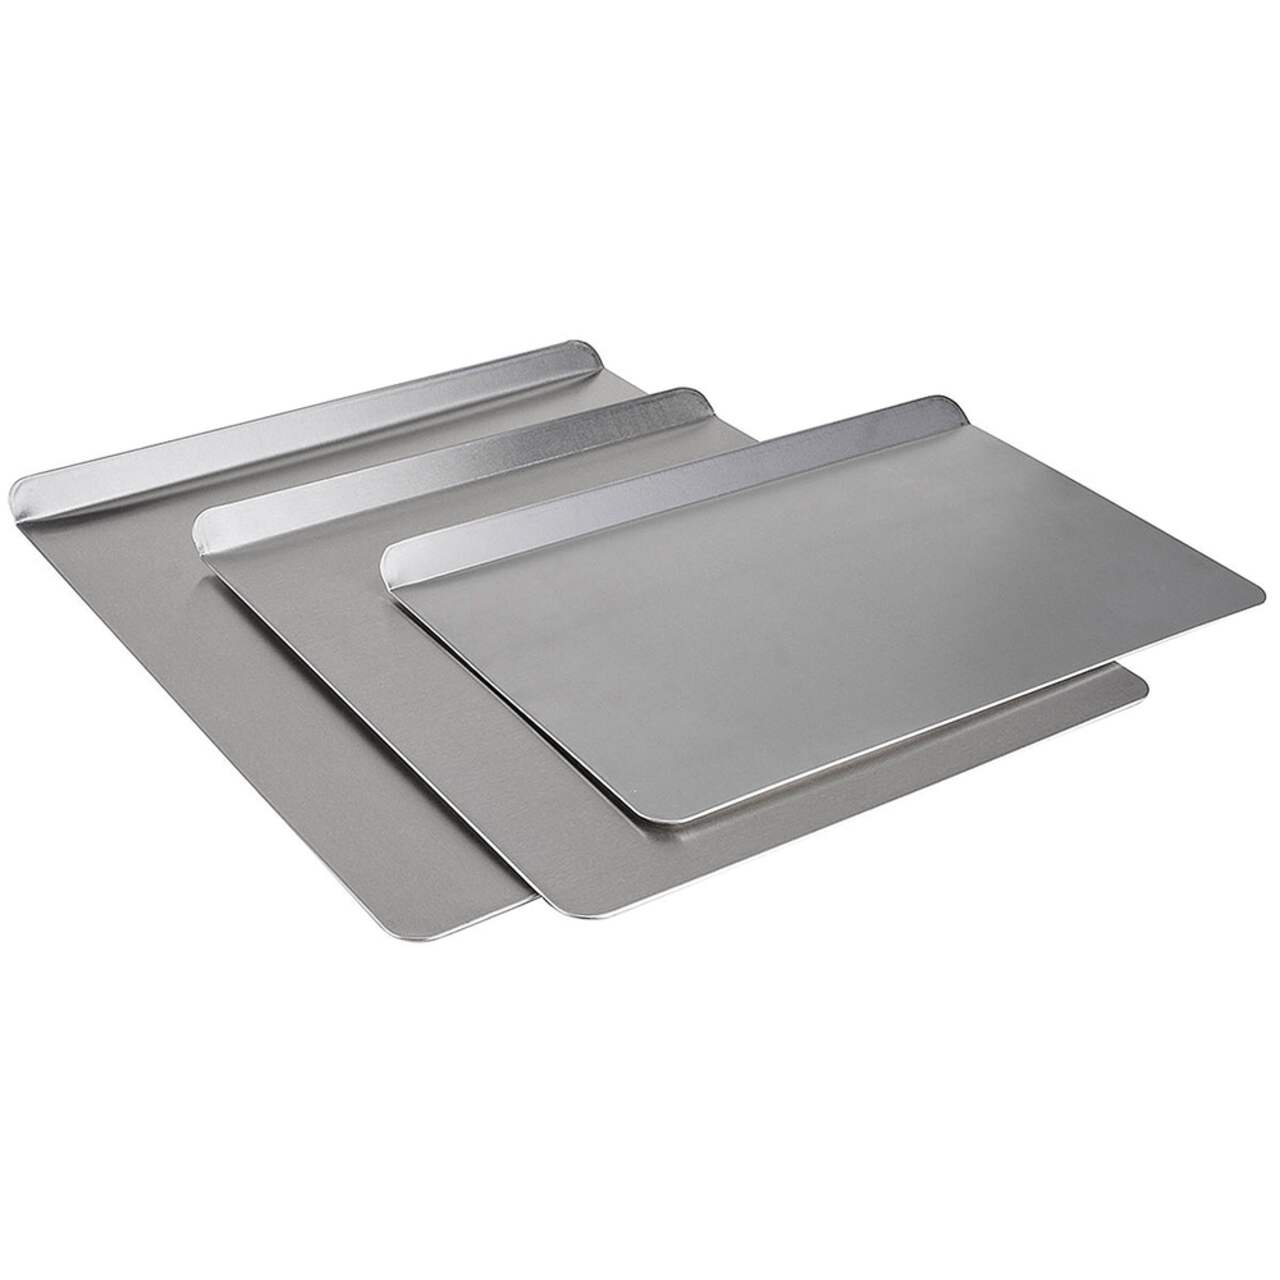 https://media-www.canadiantire.ca/product/living/kitchen/bakeware-baking-prep/2994006/t-fal-airbake-3-pack-cookie-sheet-set-f0ae21bf-44a8-415b-acbc-872b1b0936dd.png?imdensity=1&imwidth=640&impolicy=mZoom